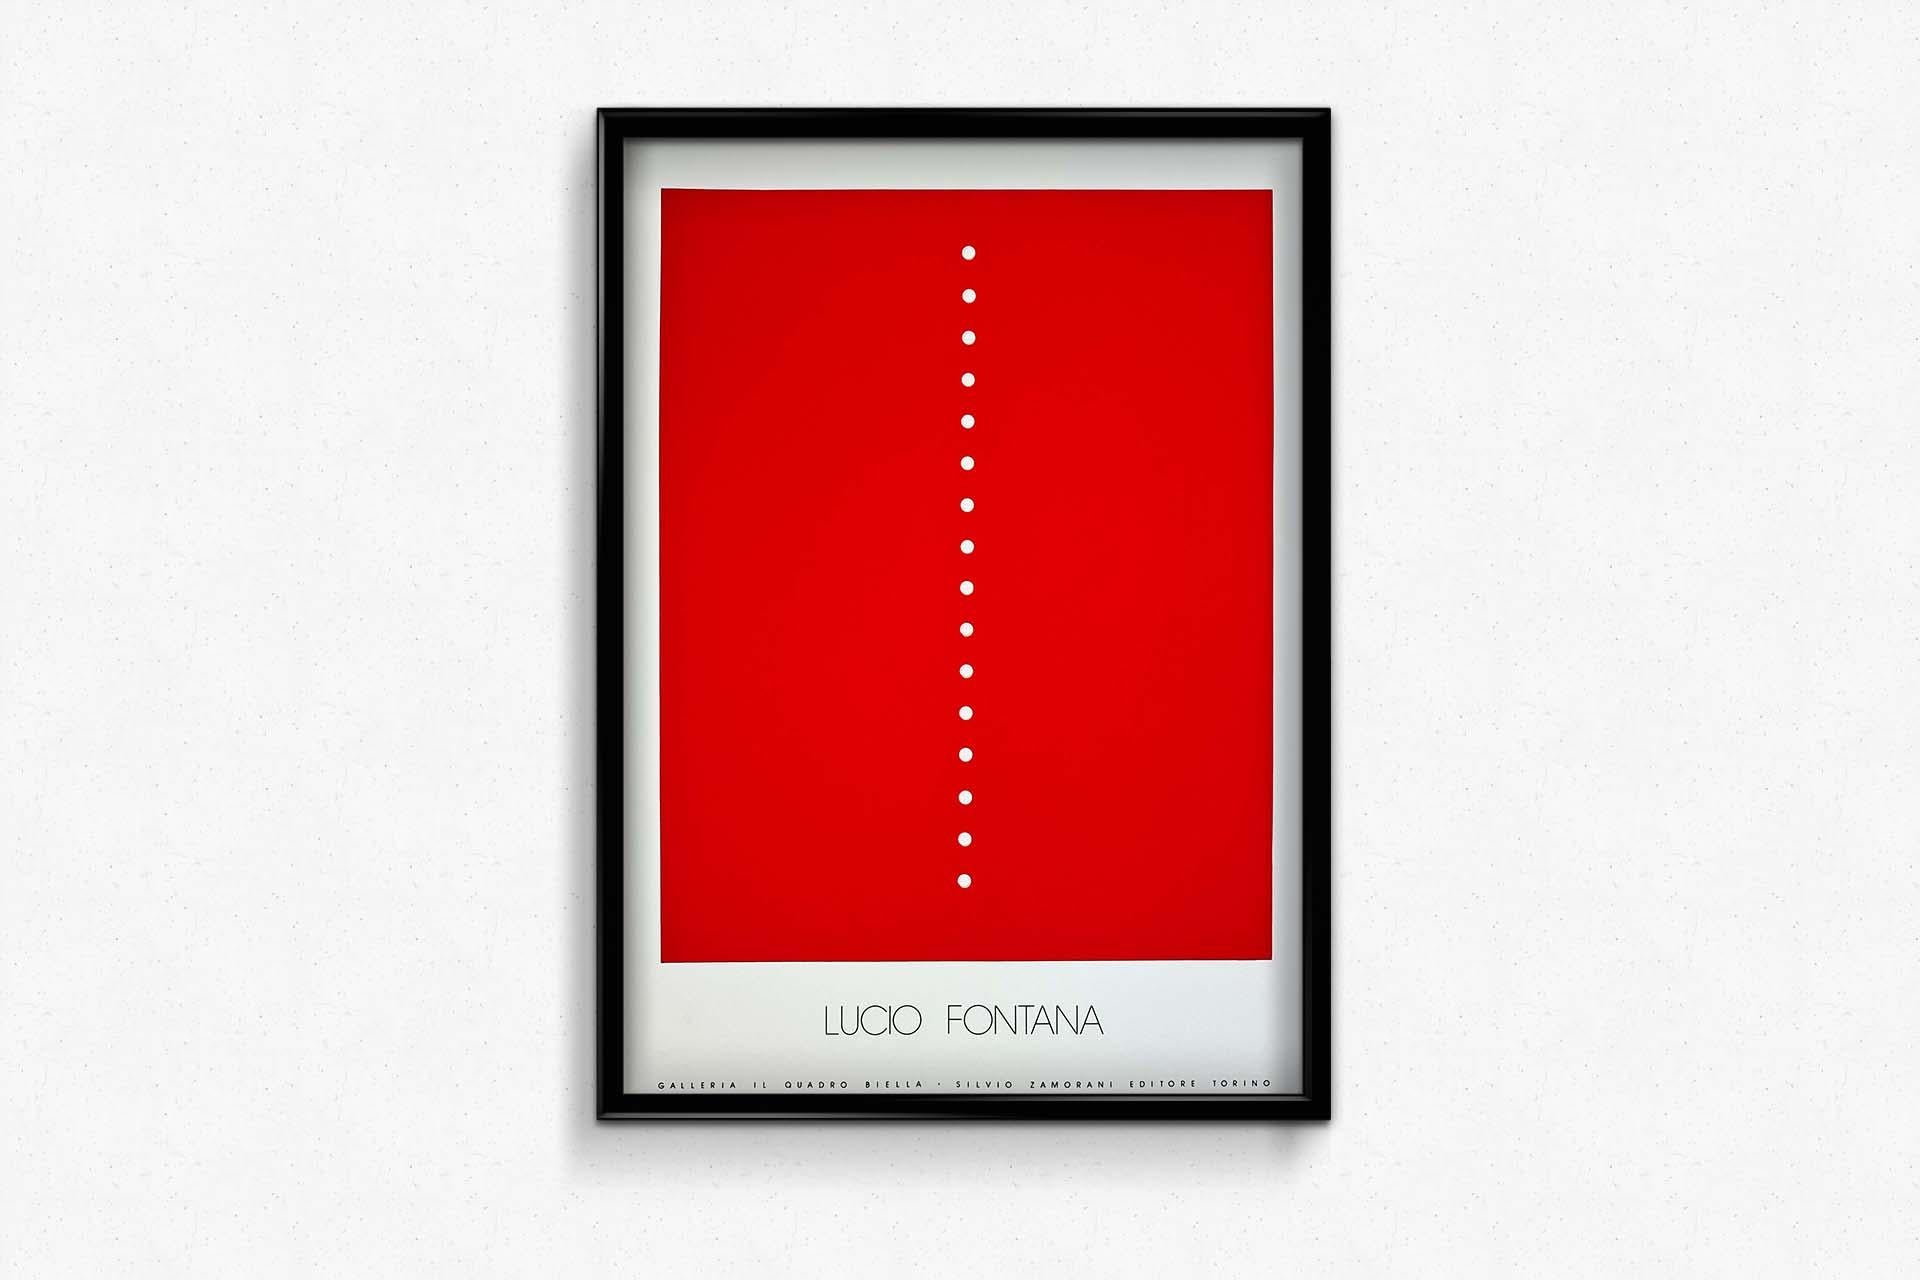 Very nice original poster made for the exhibition of Lucio Fontana at Galleria Il Quadro Biella in Turin.
Lucio Fontana 🇦🇷 (1899 - 1968) is a pioneering and visionary artist. If his name is unfamiliar to you, chances are you've seen his paintings